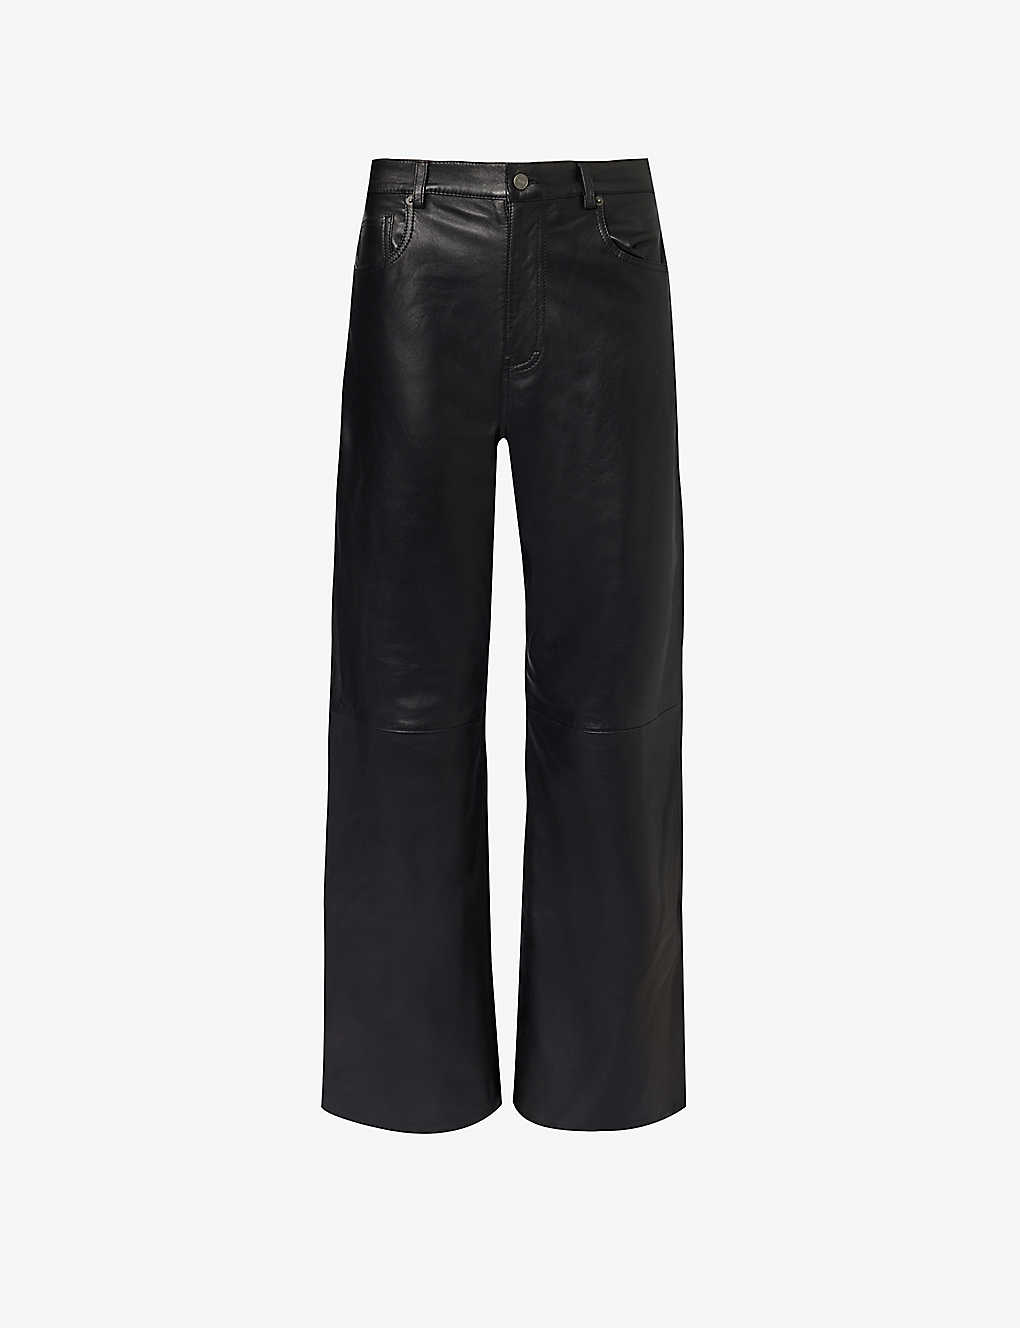 Shop Reformation Women's Black Veda Kennedy Wide-leg High-rise Leather Trousers